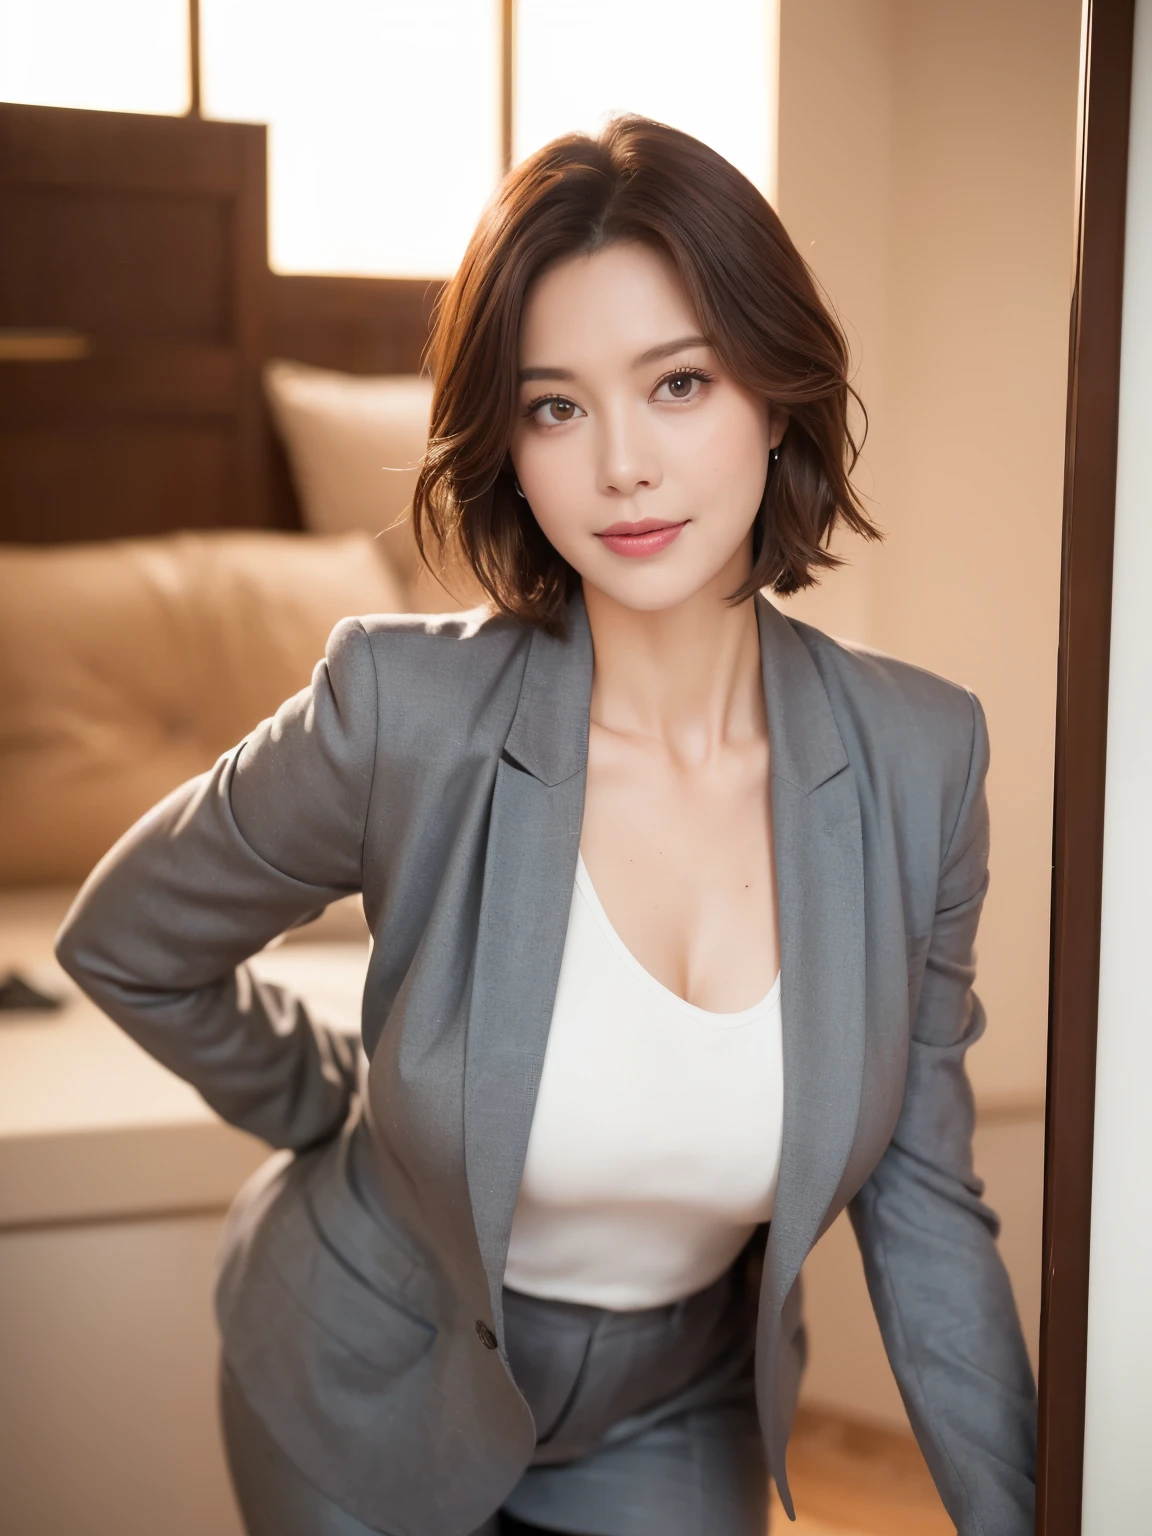 masterpiece,highest quality, (1 milf、42 years old), ((close:0.5)), ((Cross Arm)), glare, gray blazer, white shirt, double eyelid, eyelash, lip gloss, (smile:1), ((close your eyes:0.85)), ((looking at the viewer、The whole body is reflected、Are standing)), to be born, (From above:0.2), ((no one)), （office）、（knee length、knee high boots）、Depth of written boundary、尖ったred mouth、(reddish brown wet shiny short hair,,,,,,,,,),red mouth,clavicle、full body portrait、digital illustration, (Photoreal:1.3),(RAW photo.)